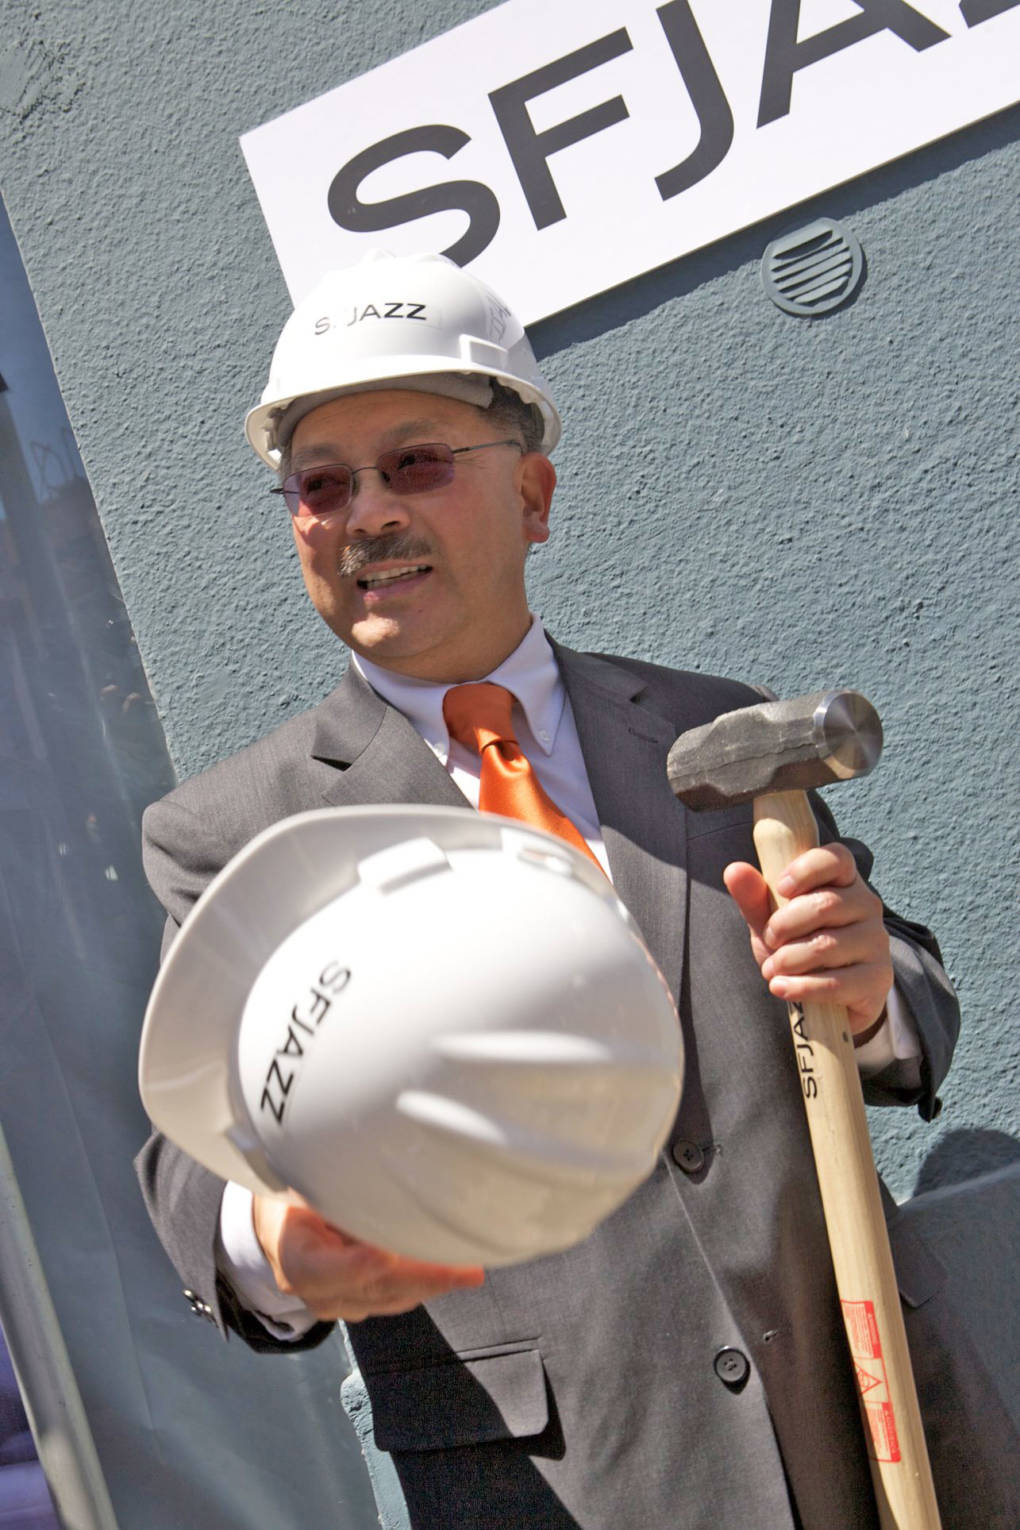 Mayor Ed Lee at a groundbreaking ceremony for SFJAZZ's new performance space and center in May 2011.